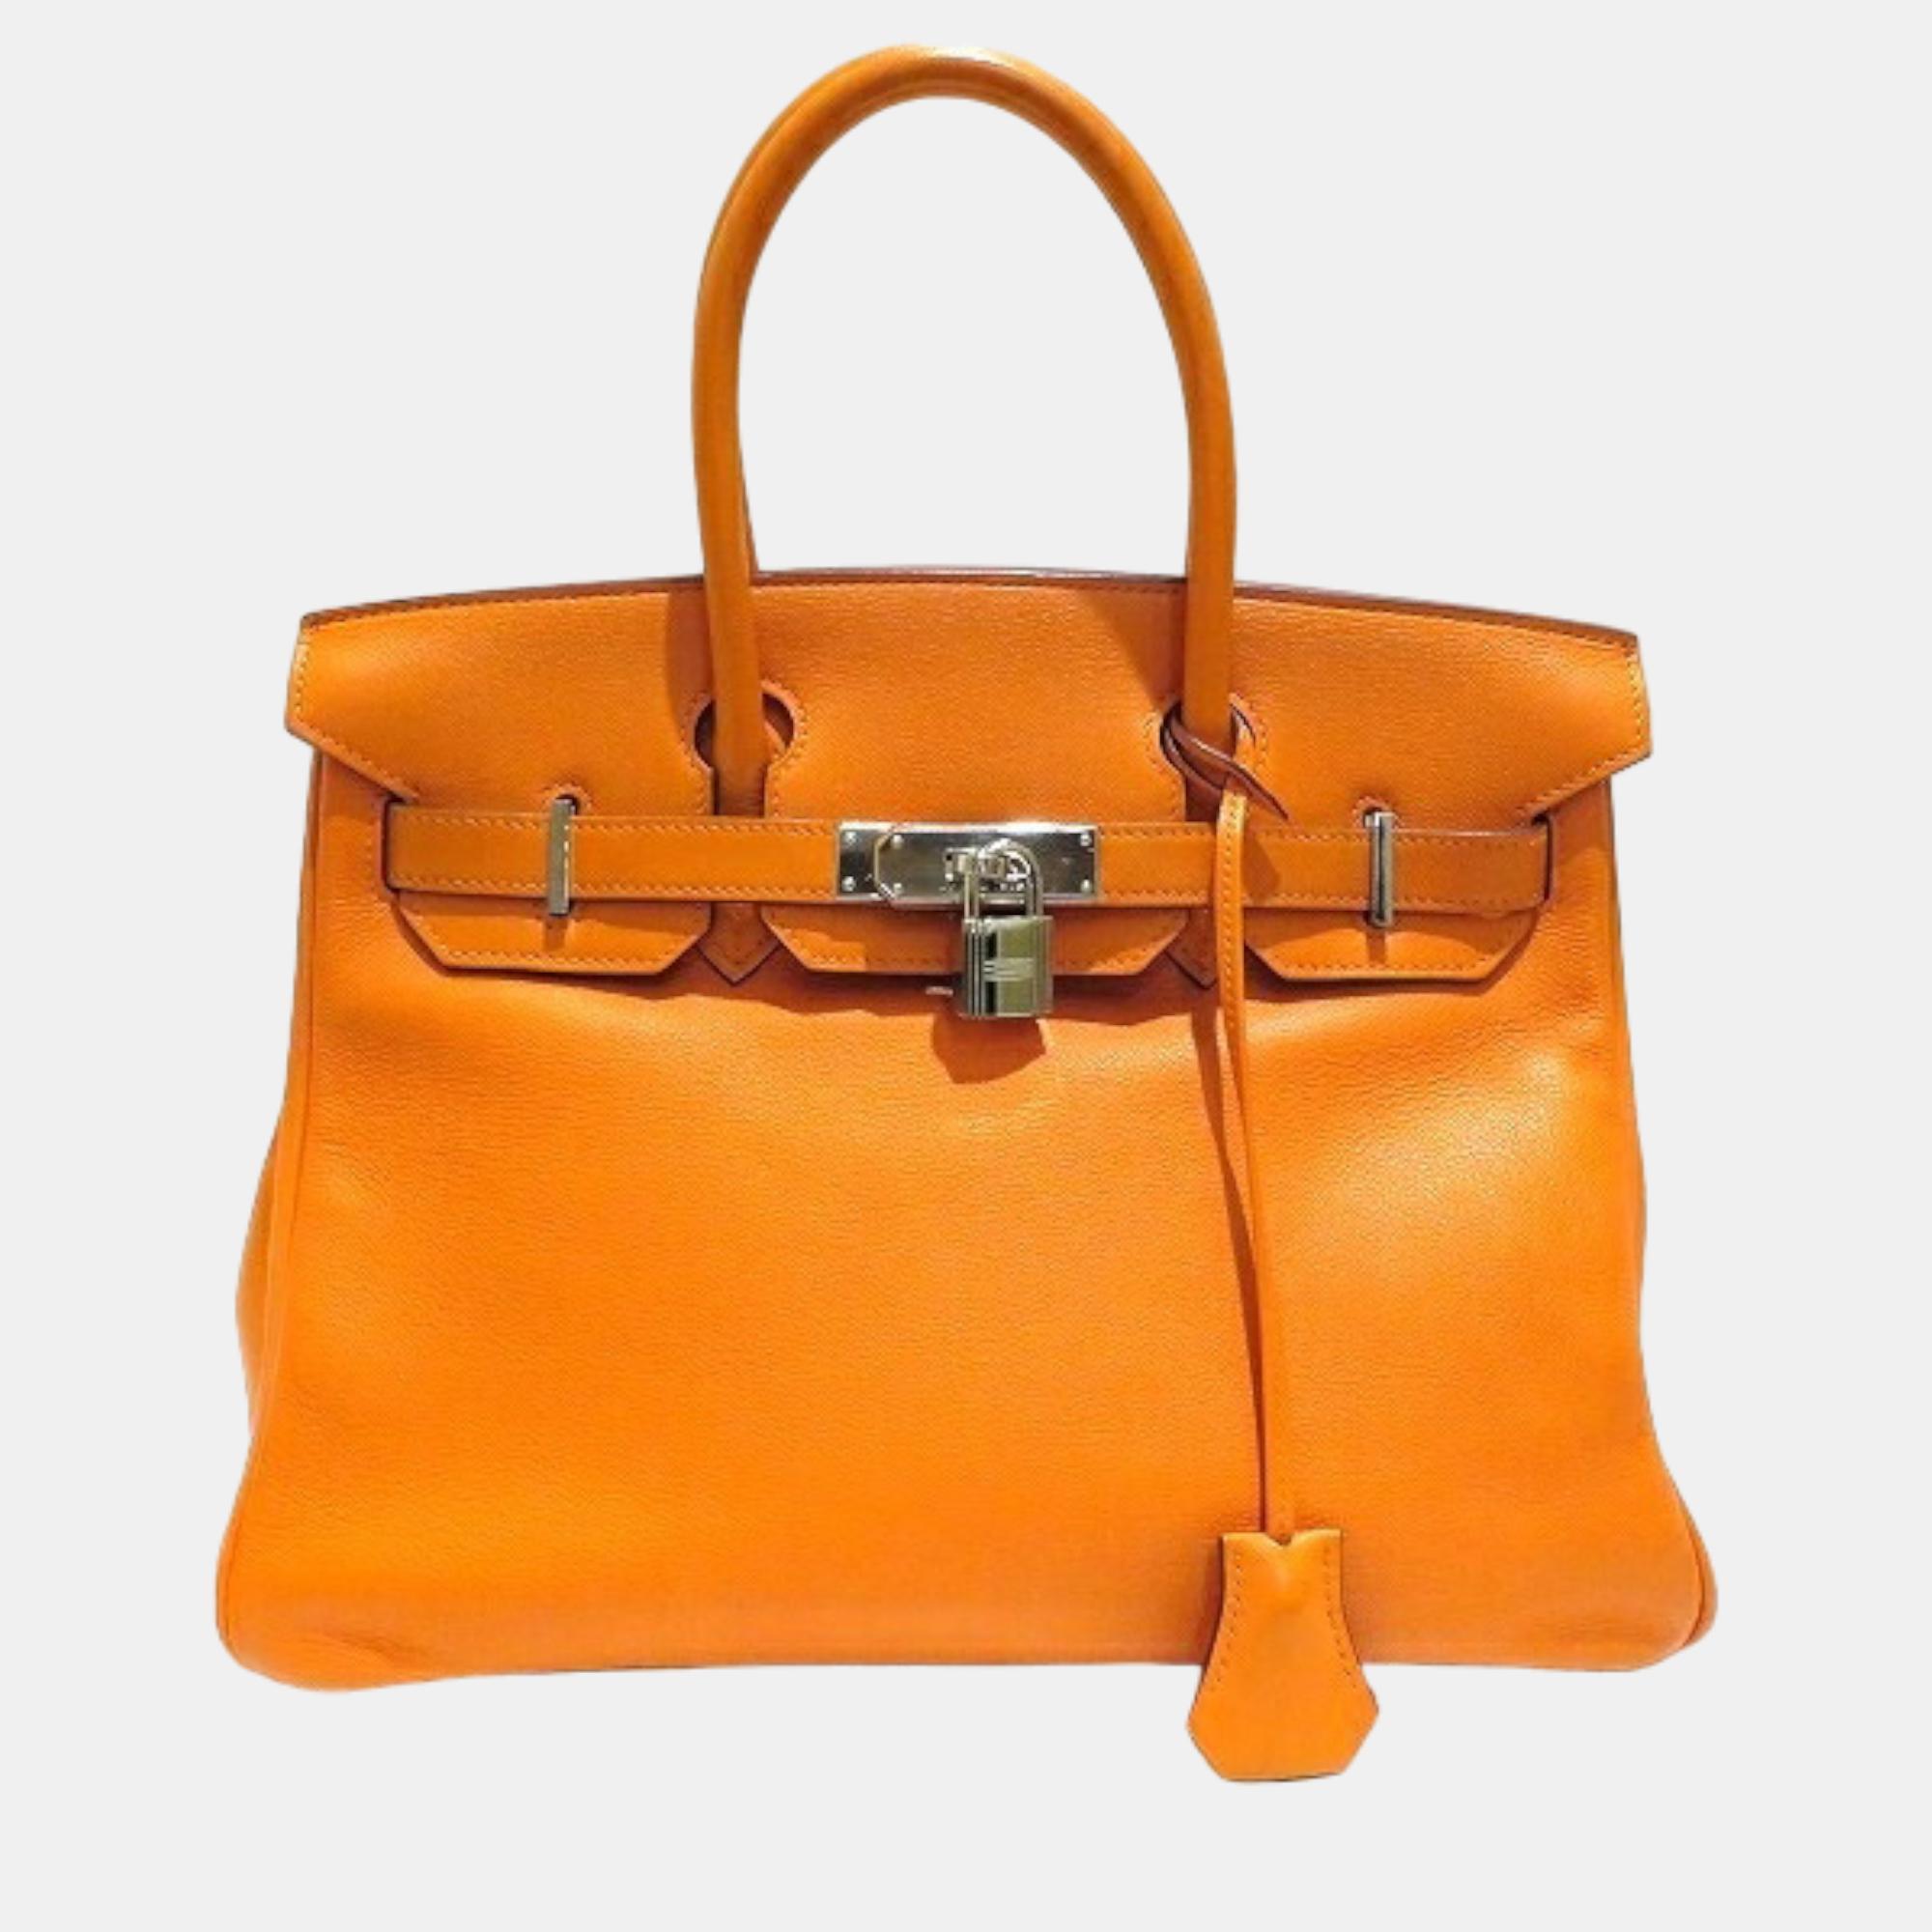 Brimming with elegance and beauty this Hermes bag will instantly amp up your ensemble. Made using the best materials this exquisite creation is a perfect ode to the Houses meticulous craftsmanship.